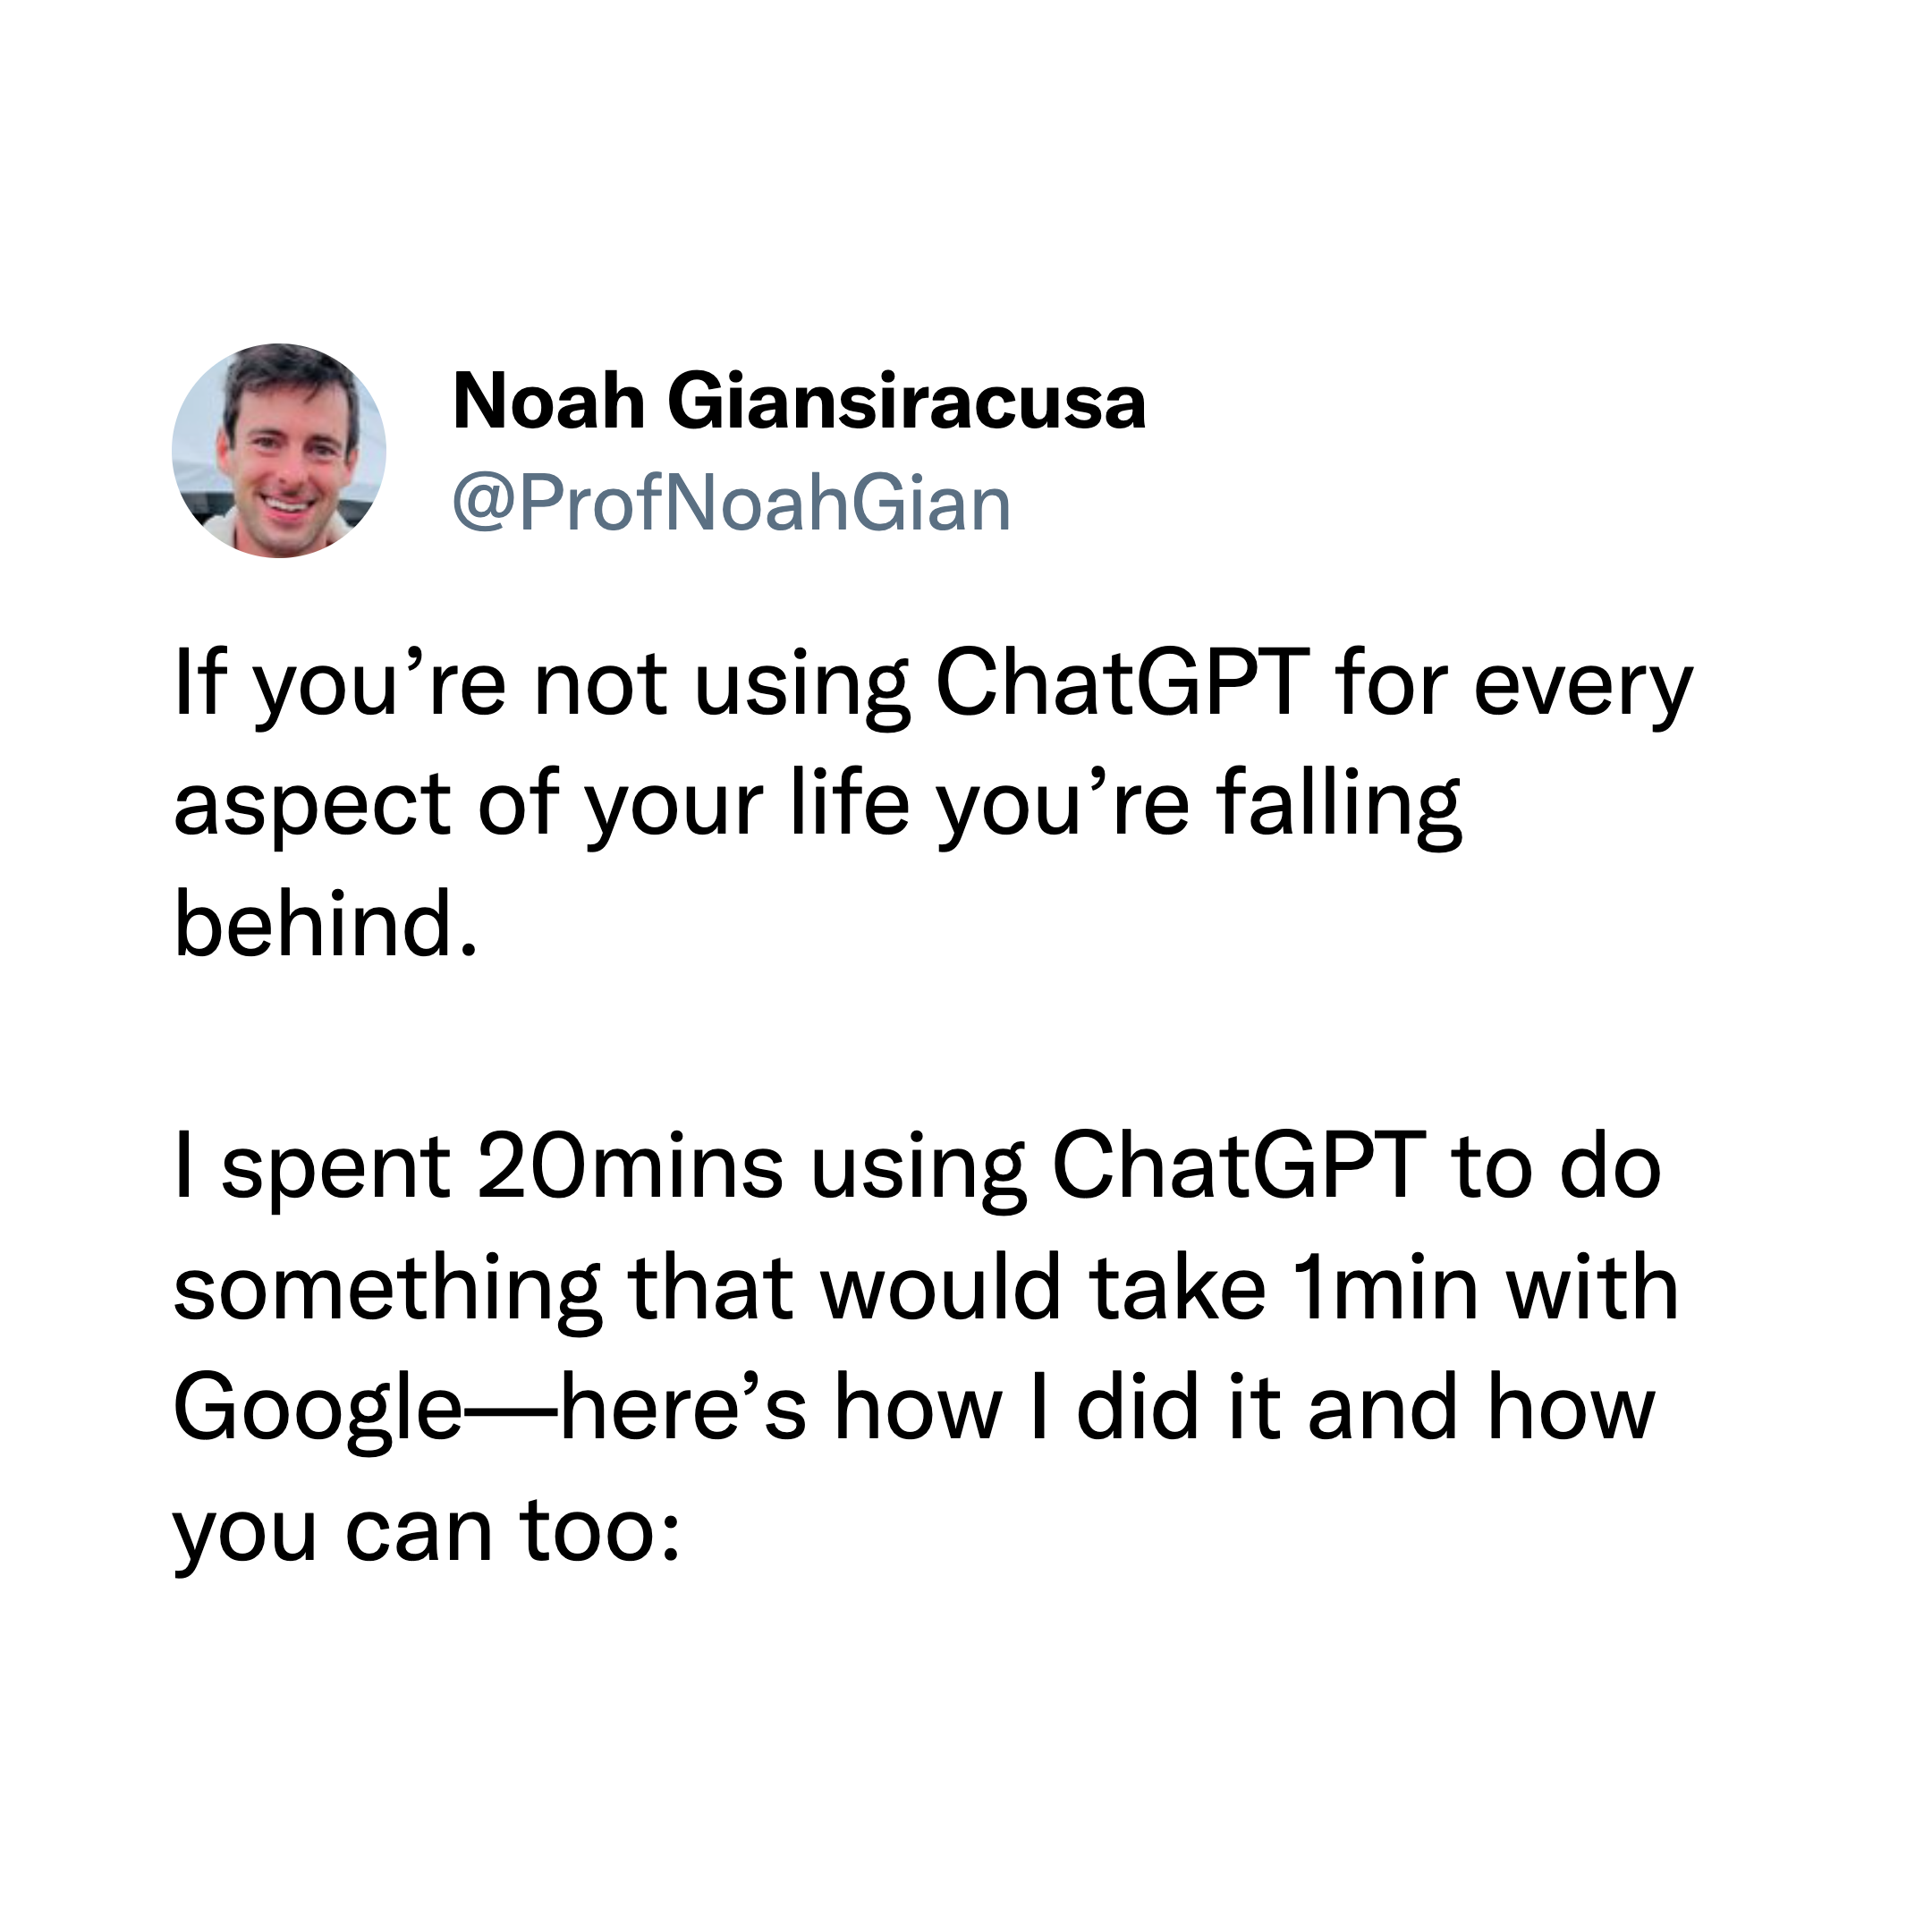 funny chatGPT tweet - If you're not using ChatGPT for every aspect of your life you're falling behind. I spent 20 mins using ChatGPT to do something that would take 1min with Google-here's how I did it and how you can too: